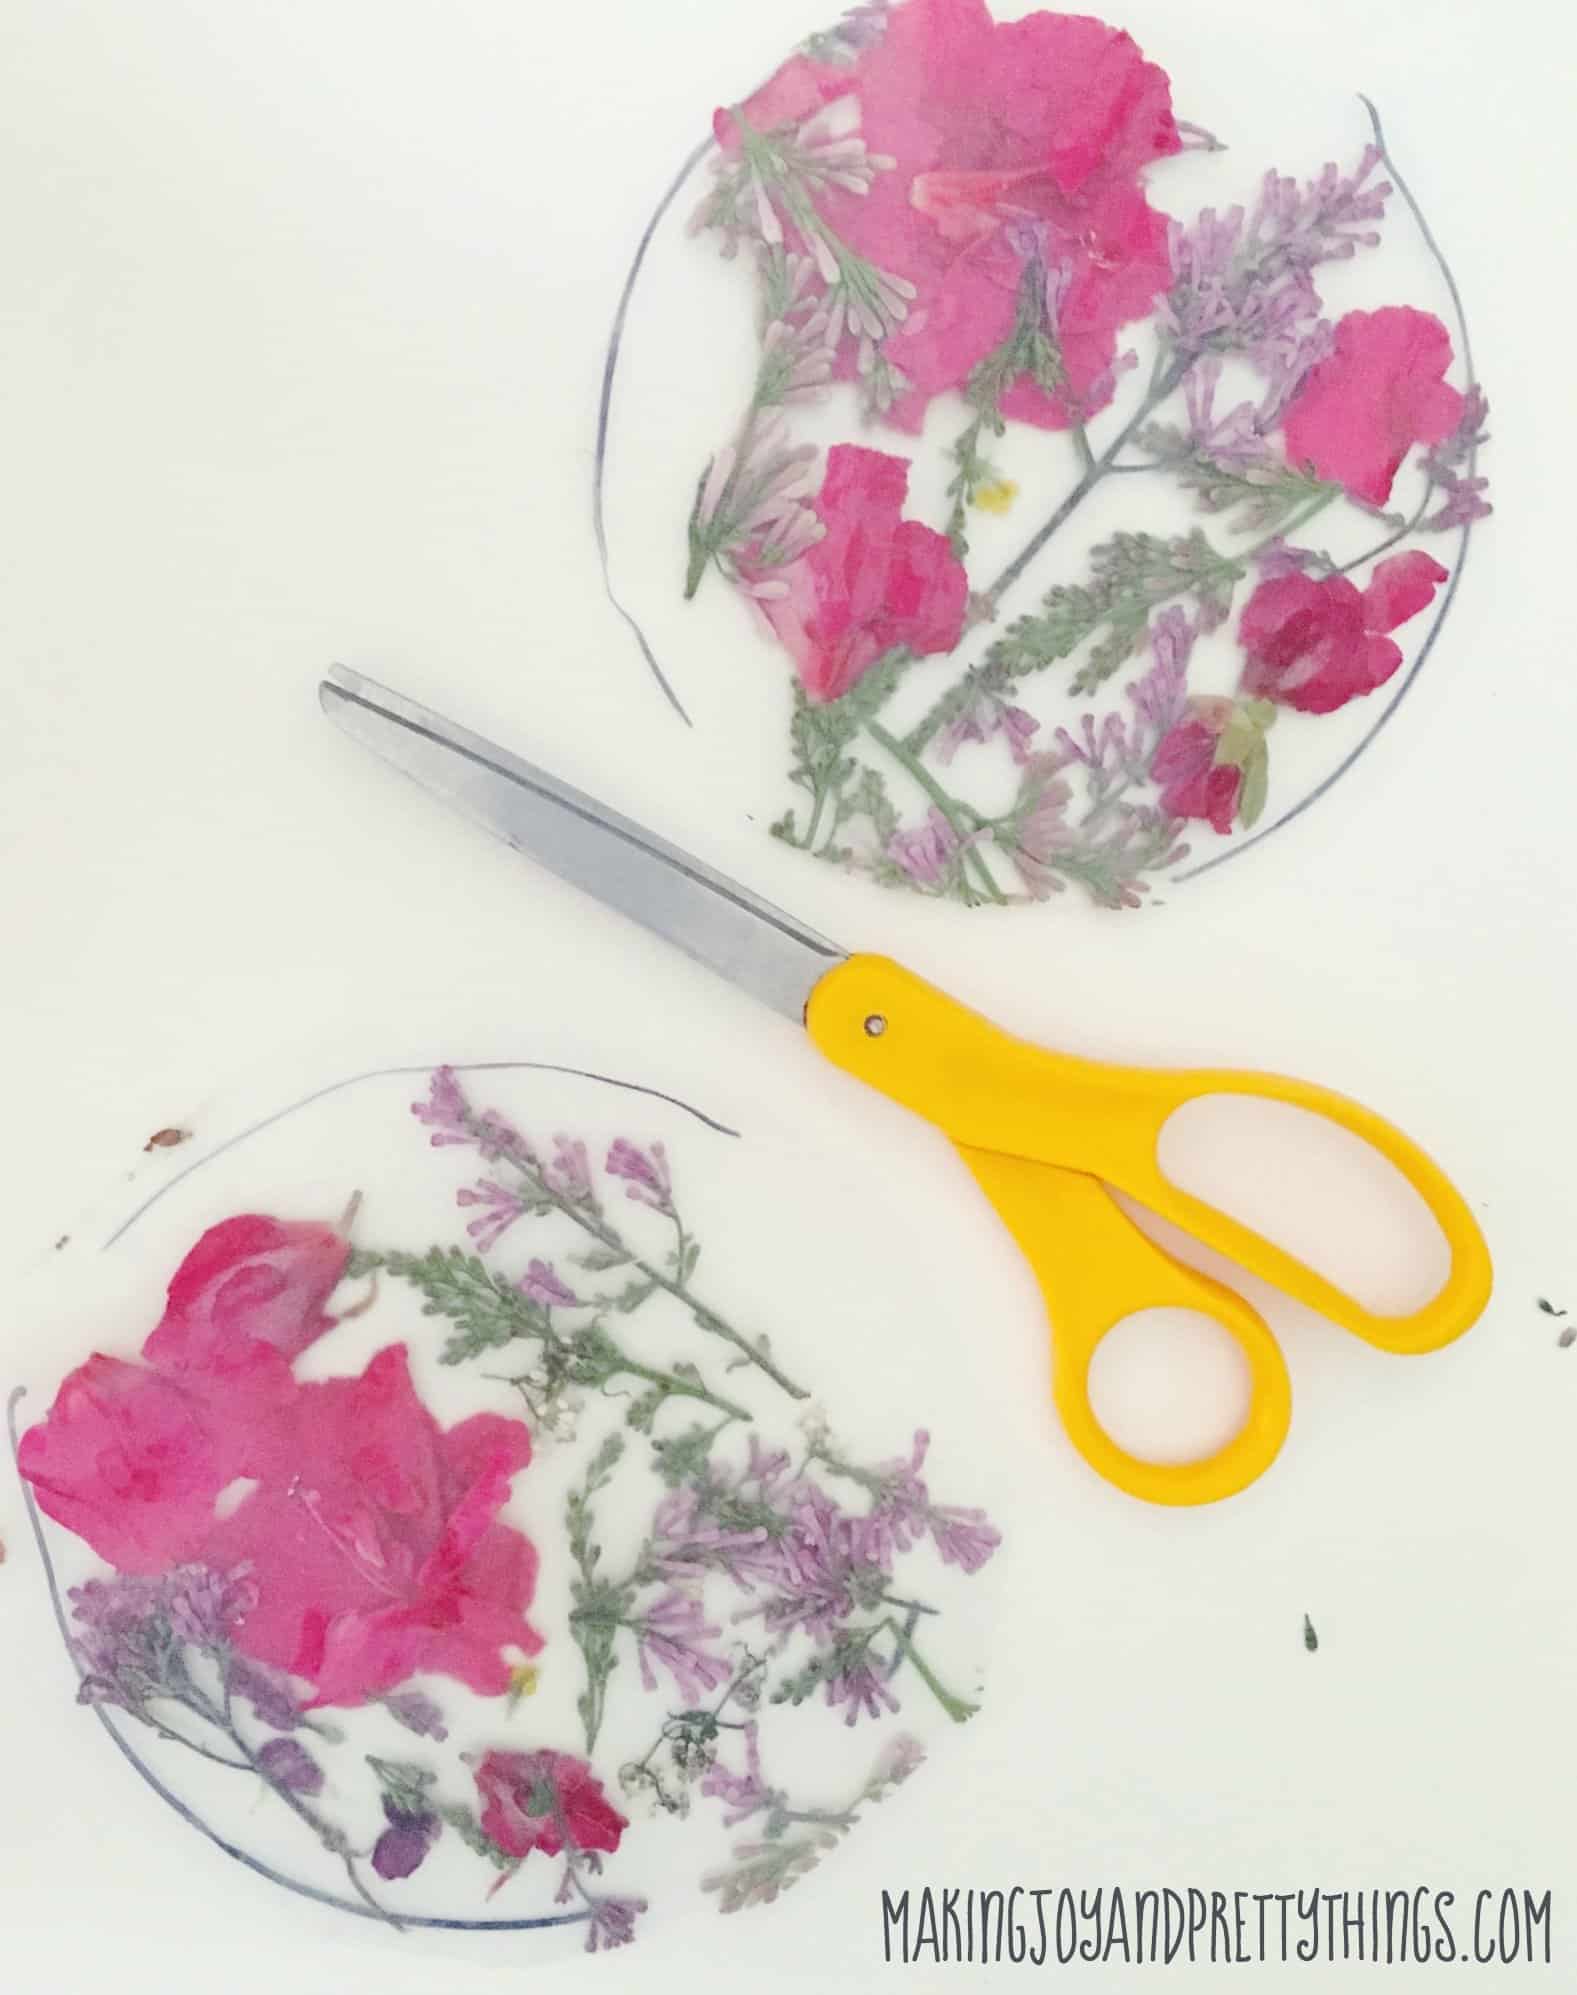 Pink and purple flower petals are sealed between sheets of contact paper, Yellow-handed scissors sit between the two circles of flowers.